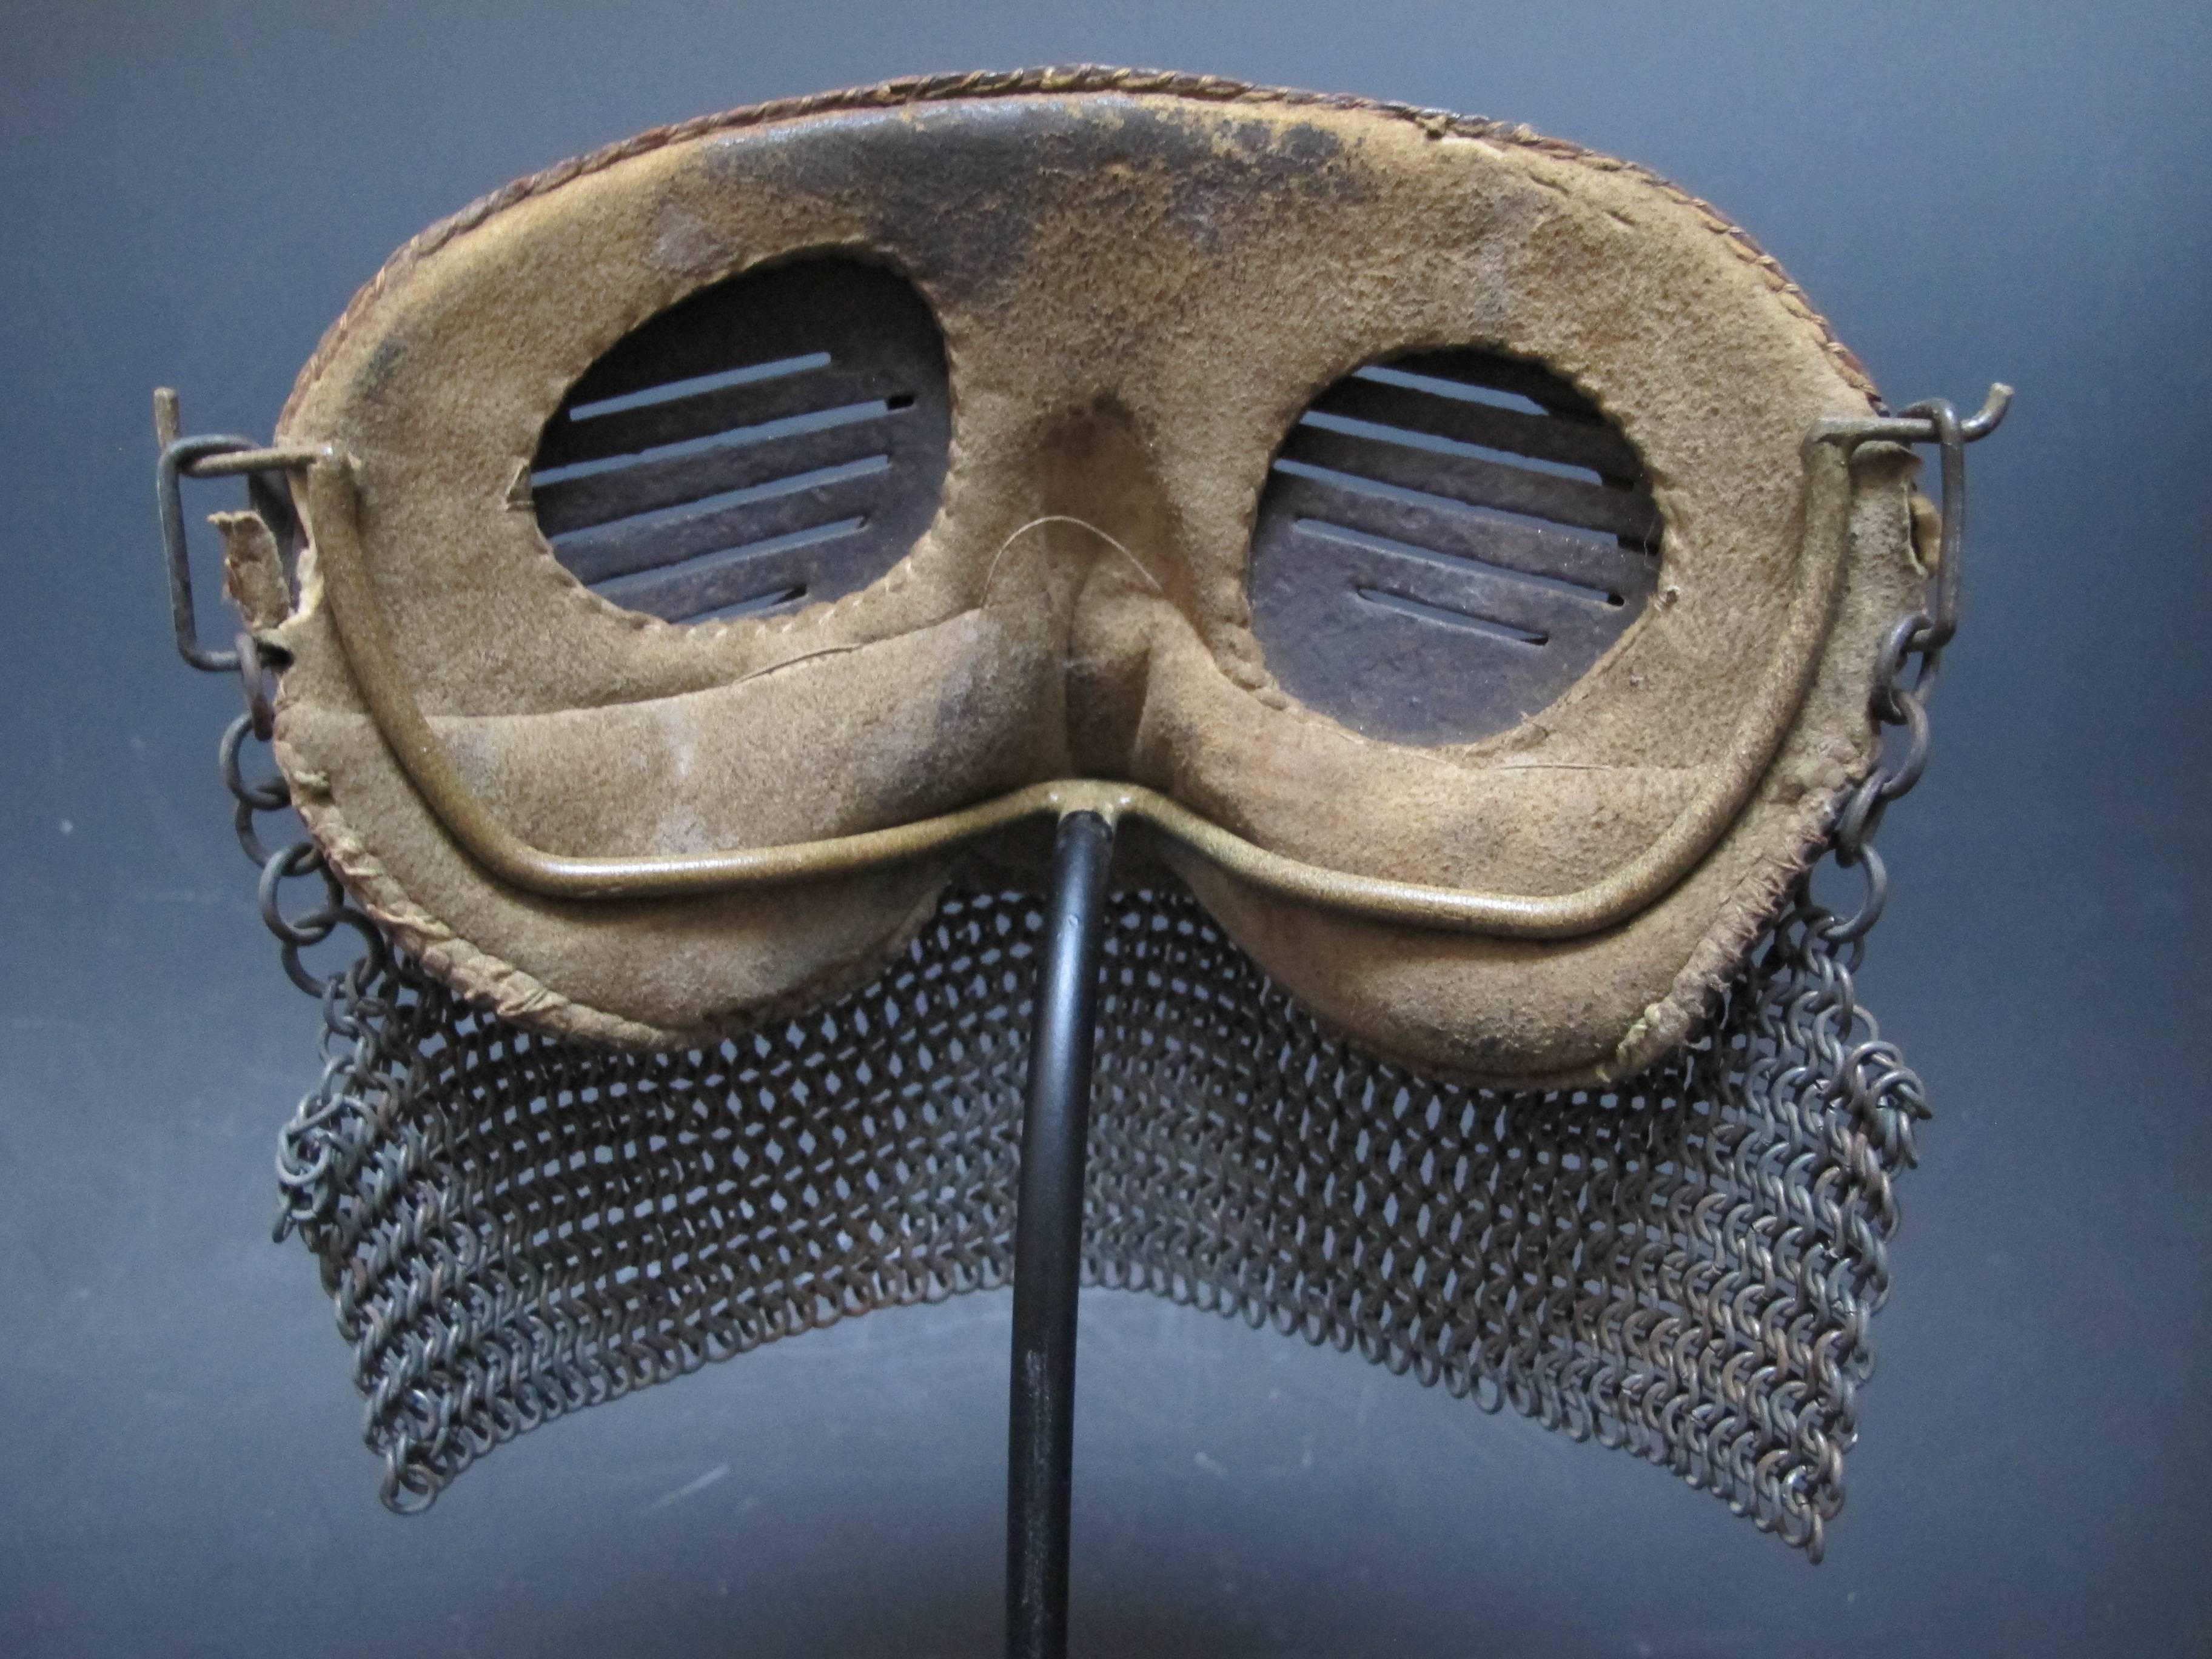 Industrial Tank Operators Mask from WWI of Iron Leather and Chain Mail